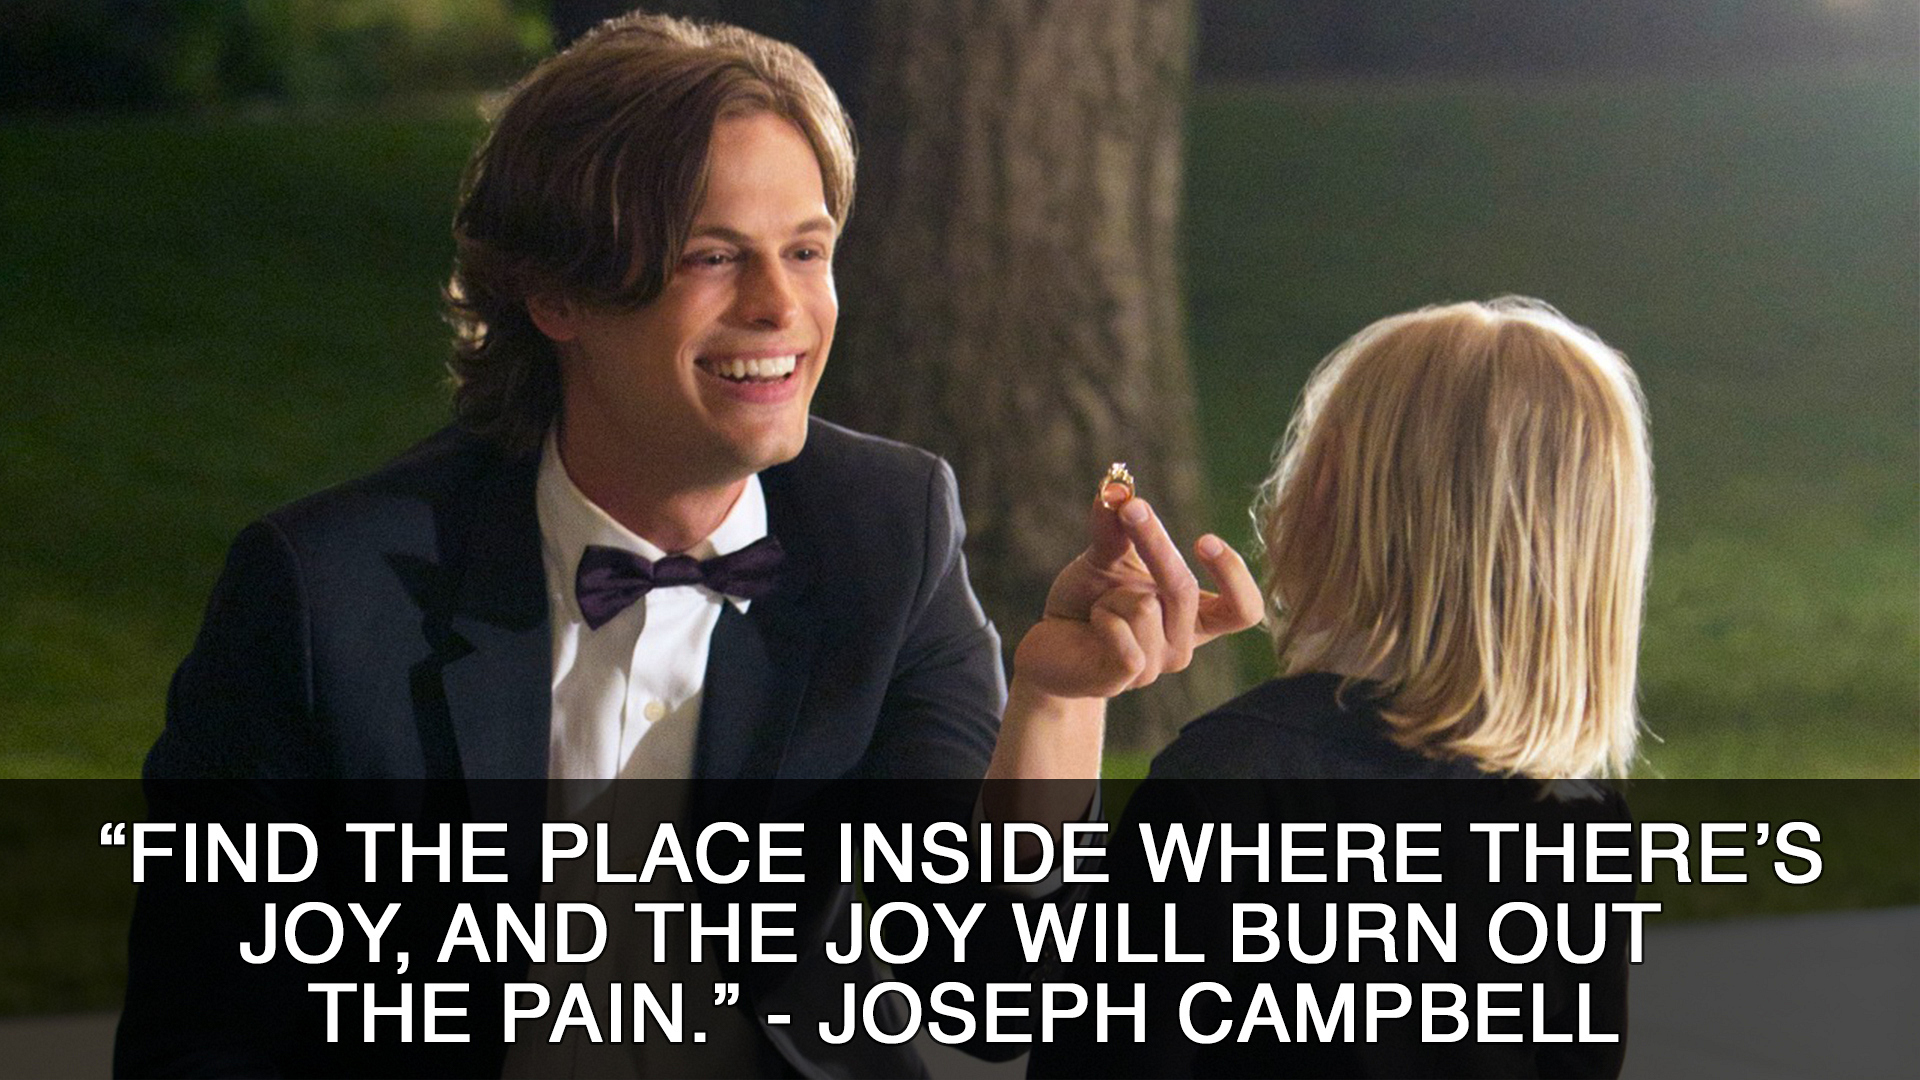 15 Profound Criminal Minds Quotes That Will Inspire You 